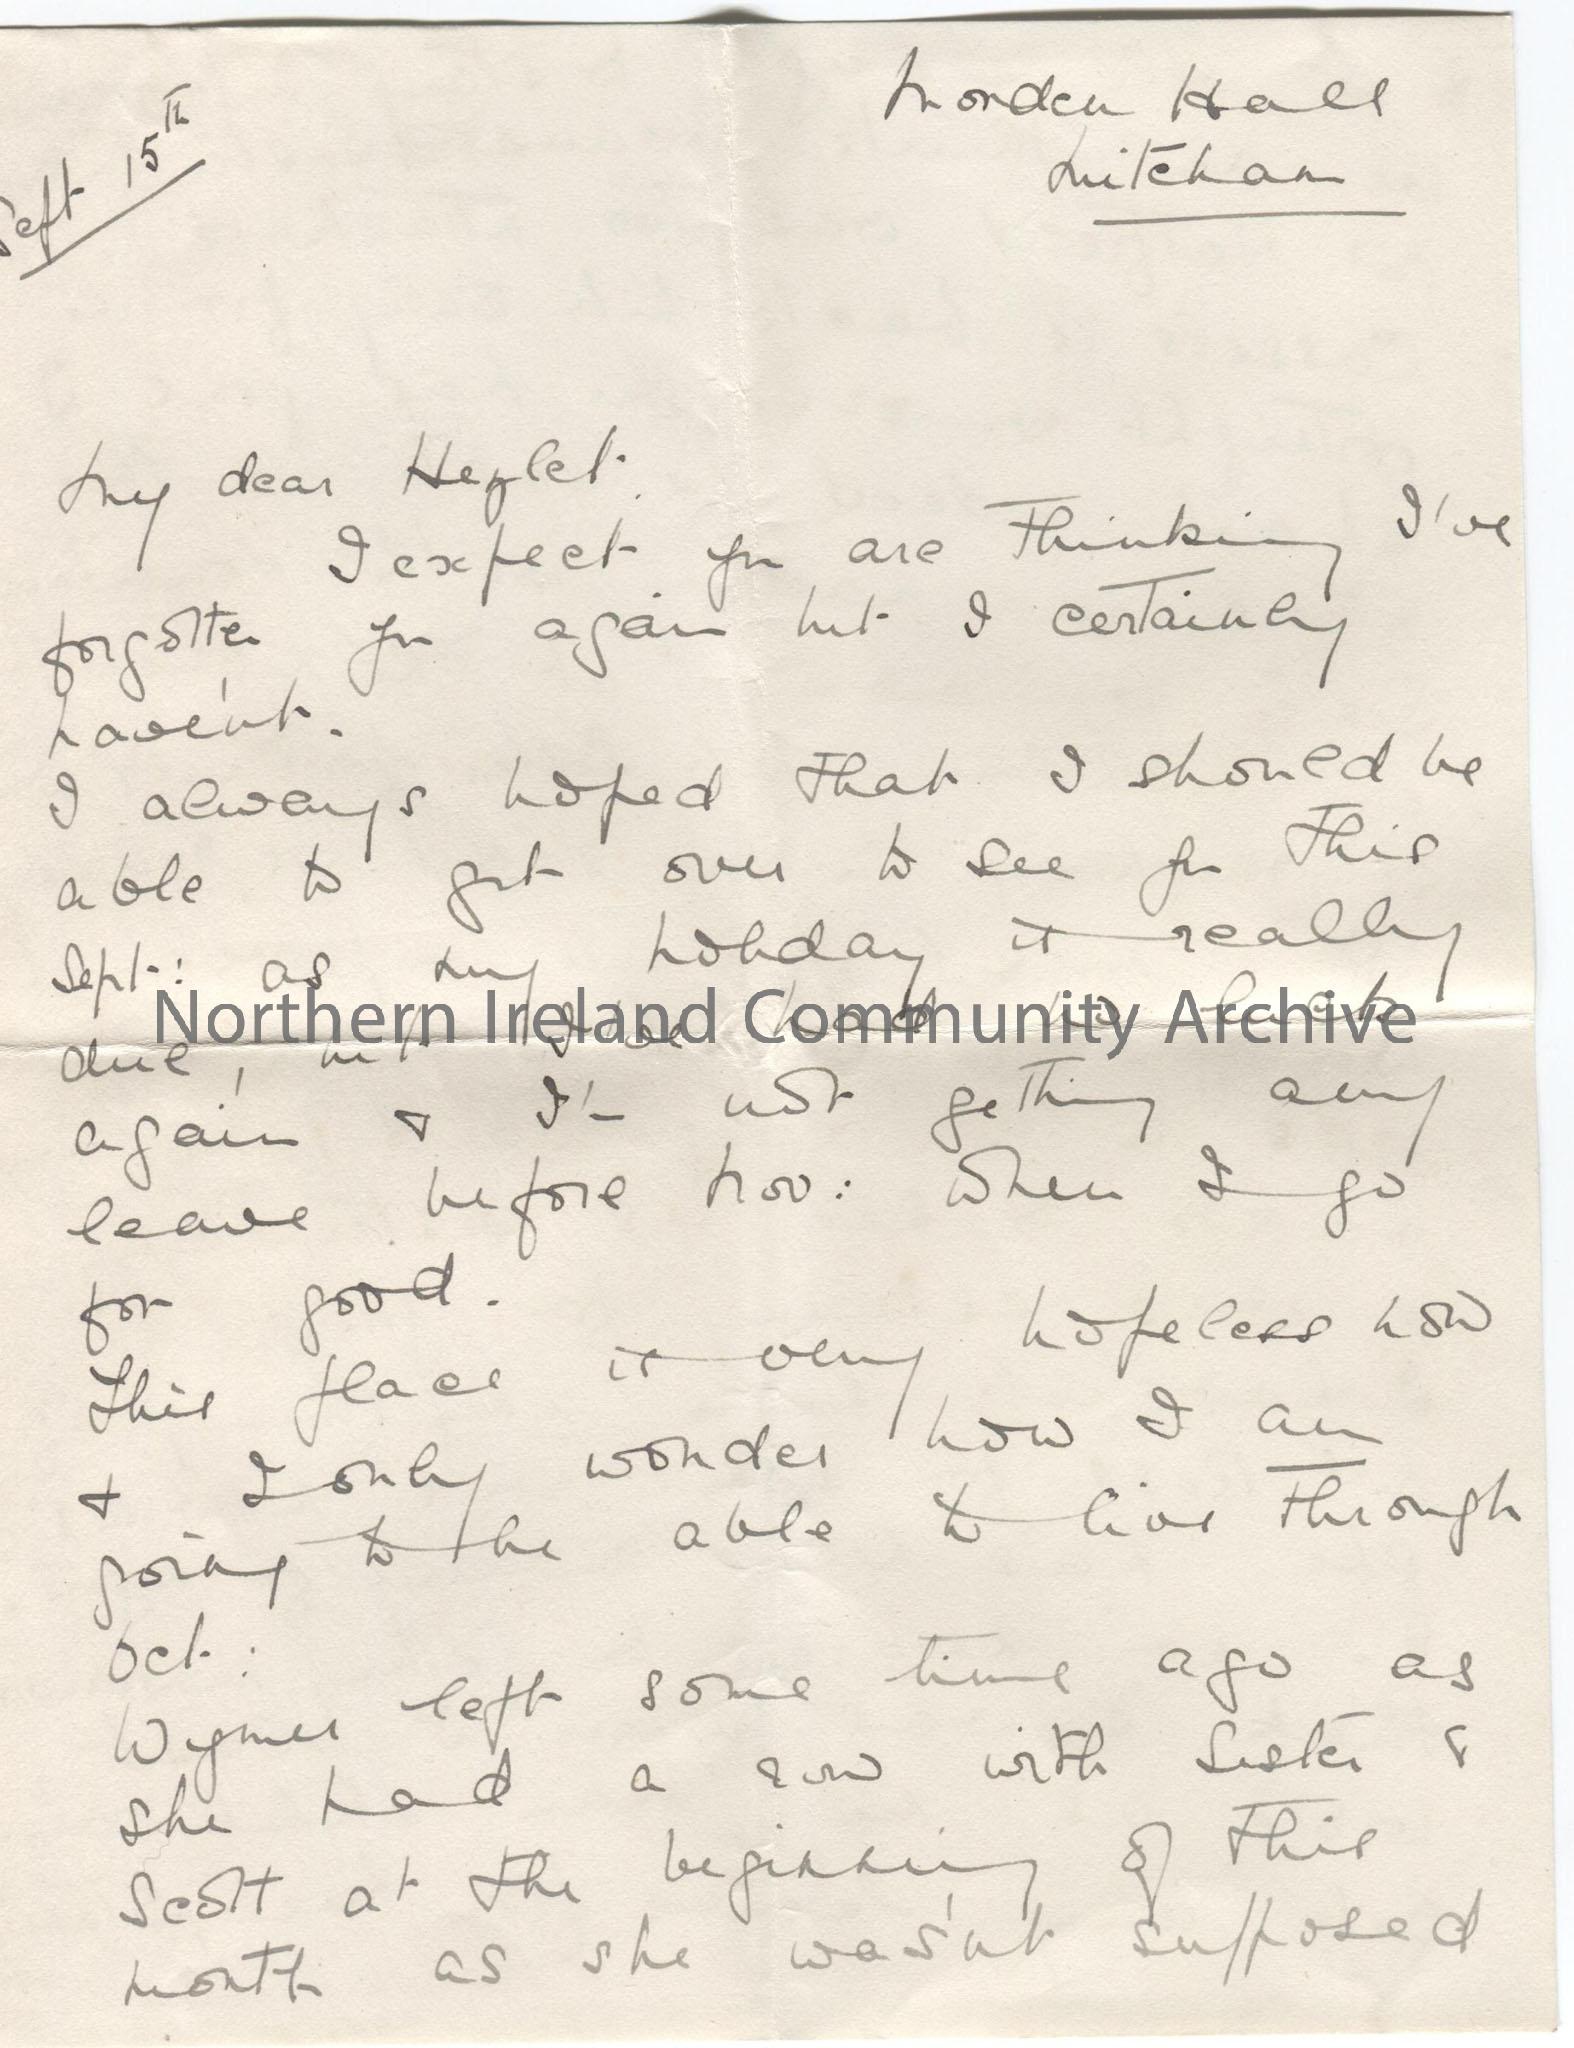 Page 1 of a letter to ‘My dear Hezlet’, dated September 15th and sent from Morden Hall. Letter mentions Morden Hall – nurses leaving, and coming back,…